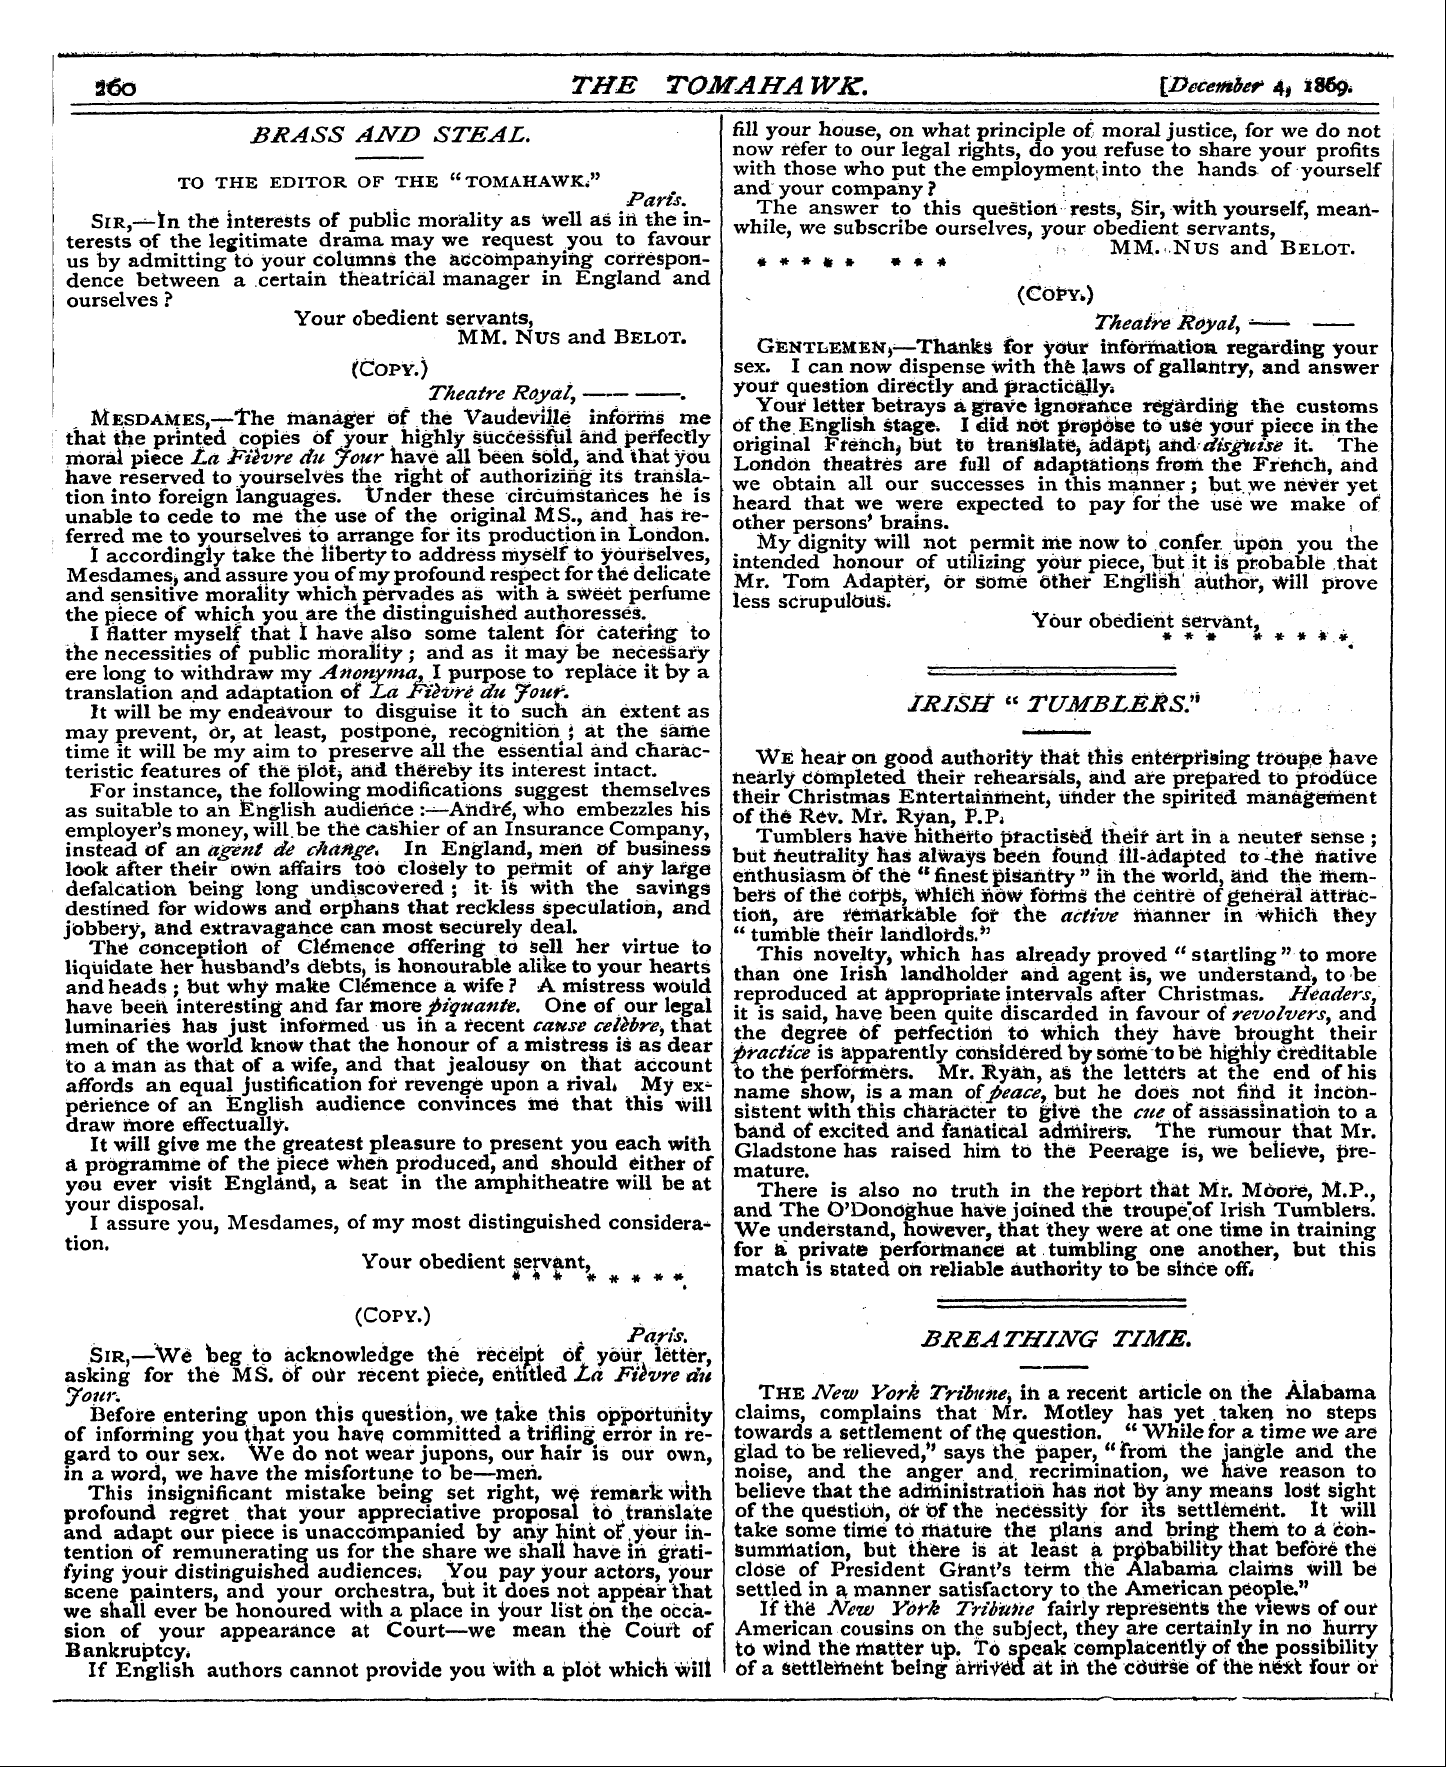 Tomahawk (1867-1870): jS F Y, 1st edition - Breathing Time.